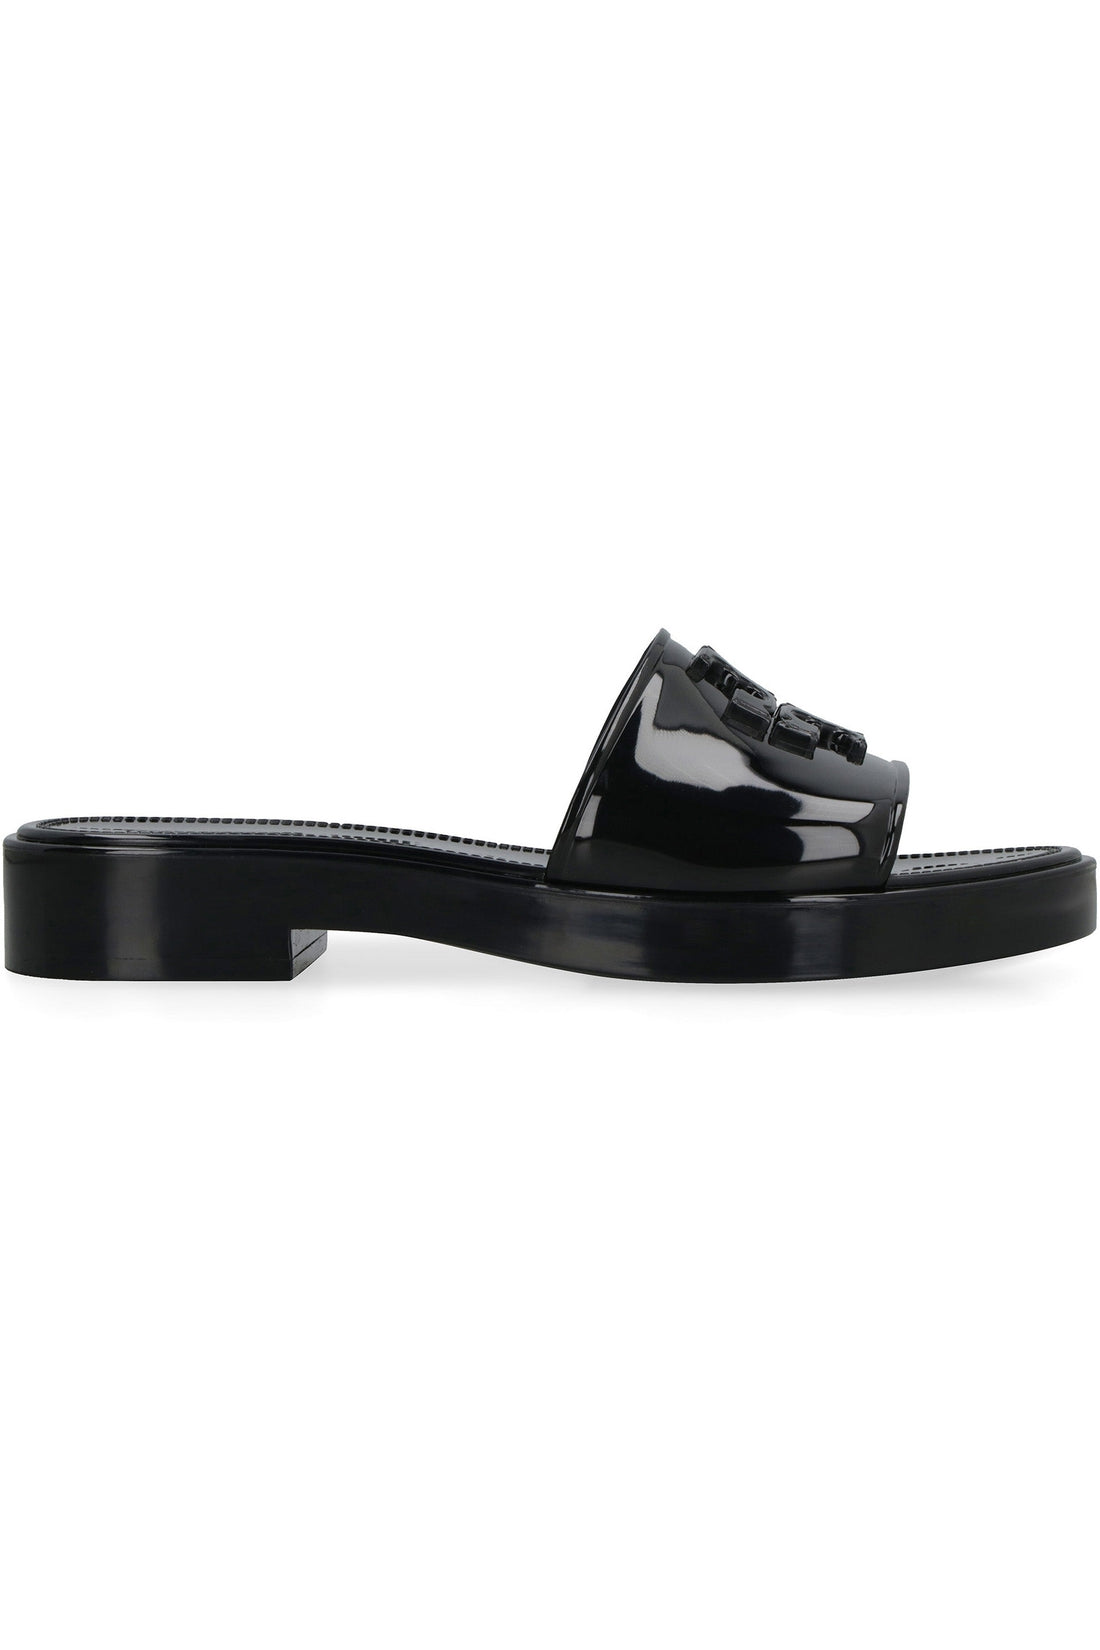 Tory Burch-OUTLET-SALE-Eleanor Jelly rubber slides-ARCHIVIST